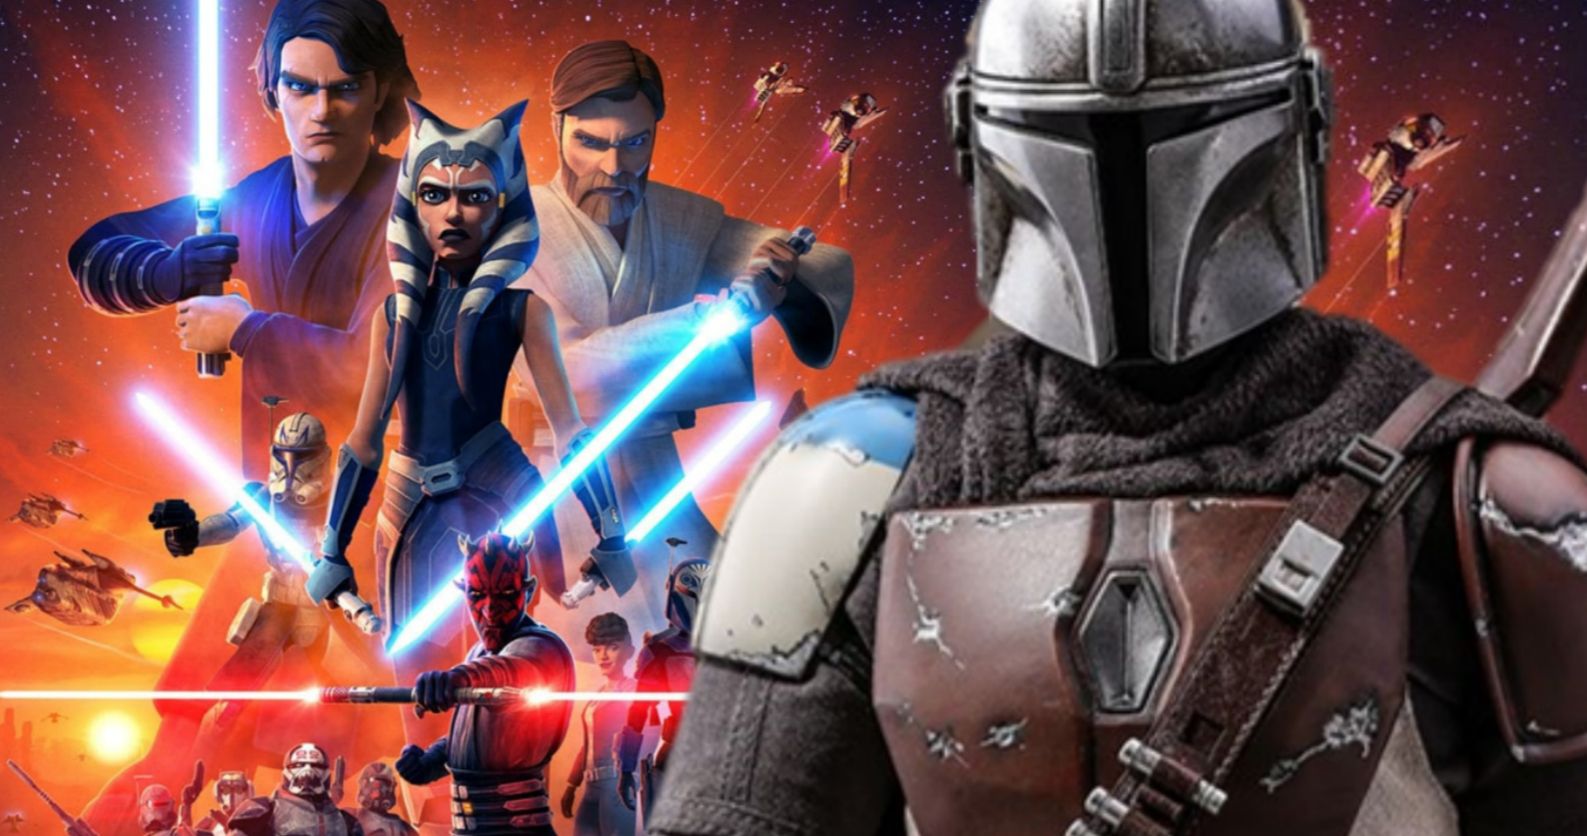 Ahsoka Tano to Be Joined by More Clone Wars Characters in The Mandalorian Season 2?